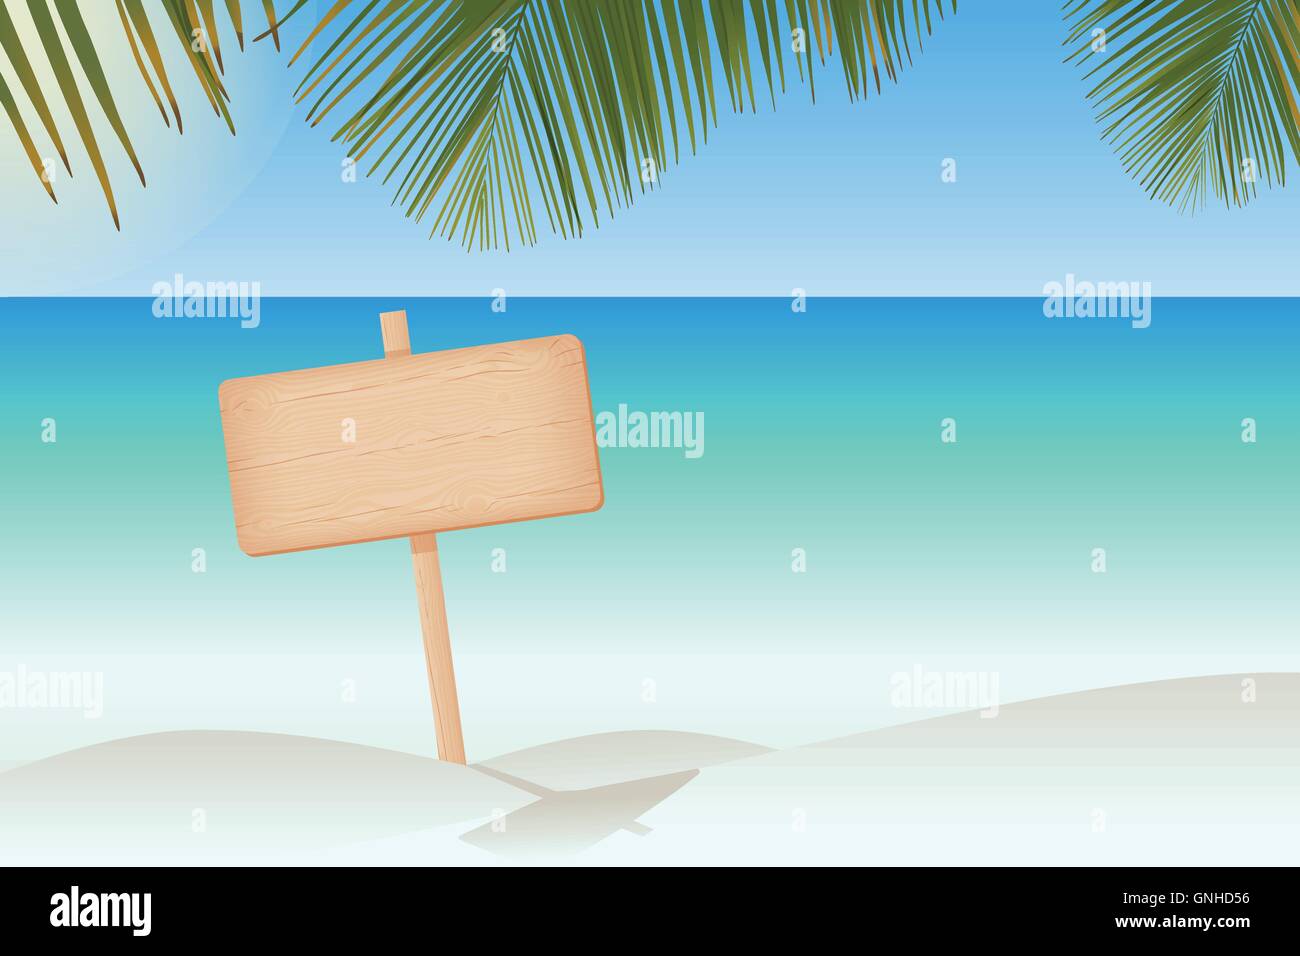 Natural textured wooden rectangular signboard on a pole at the paradise beach vector illustration Stock Vector